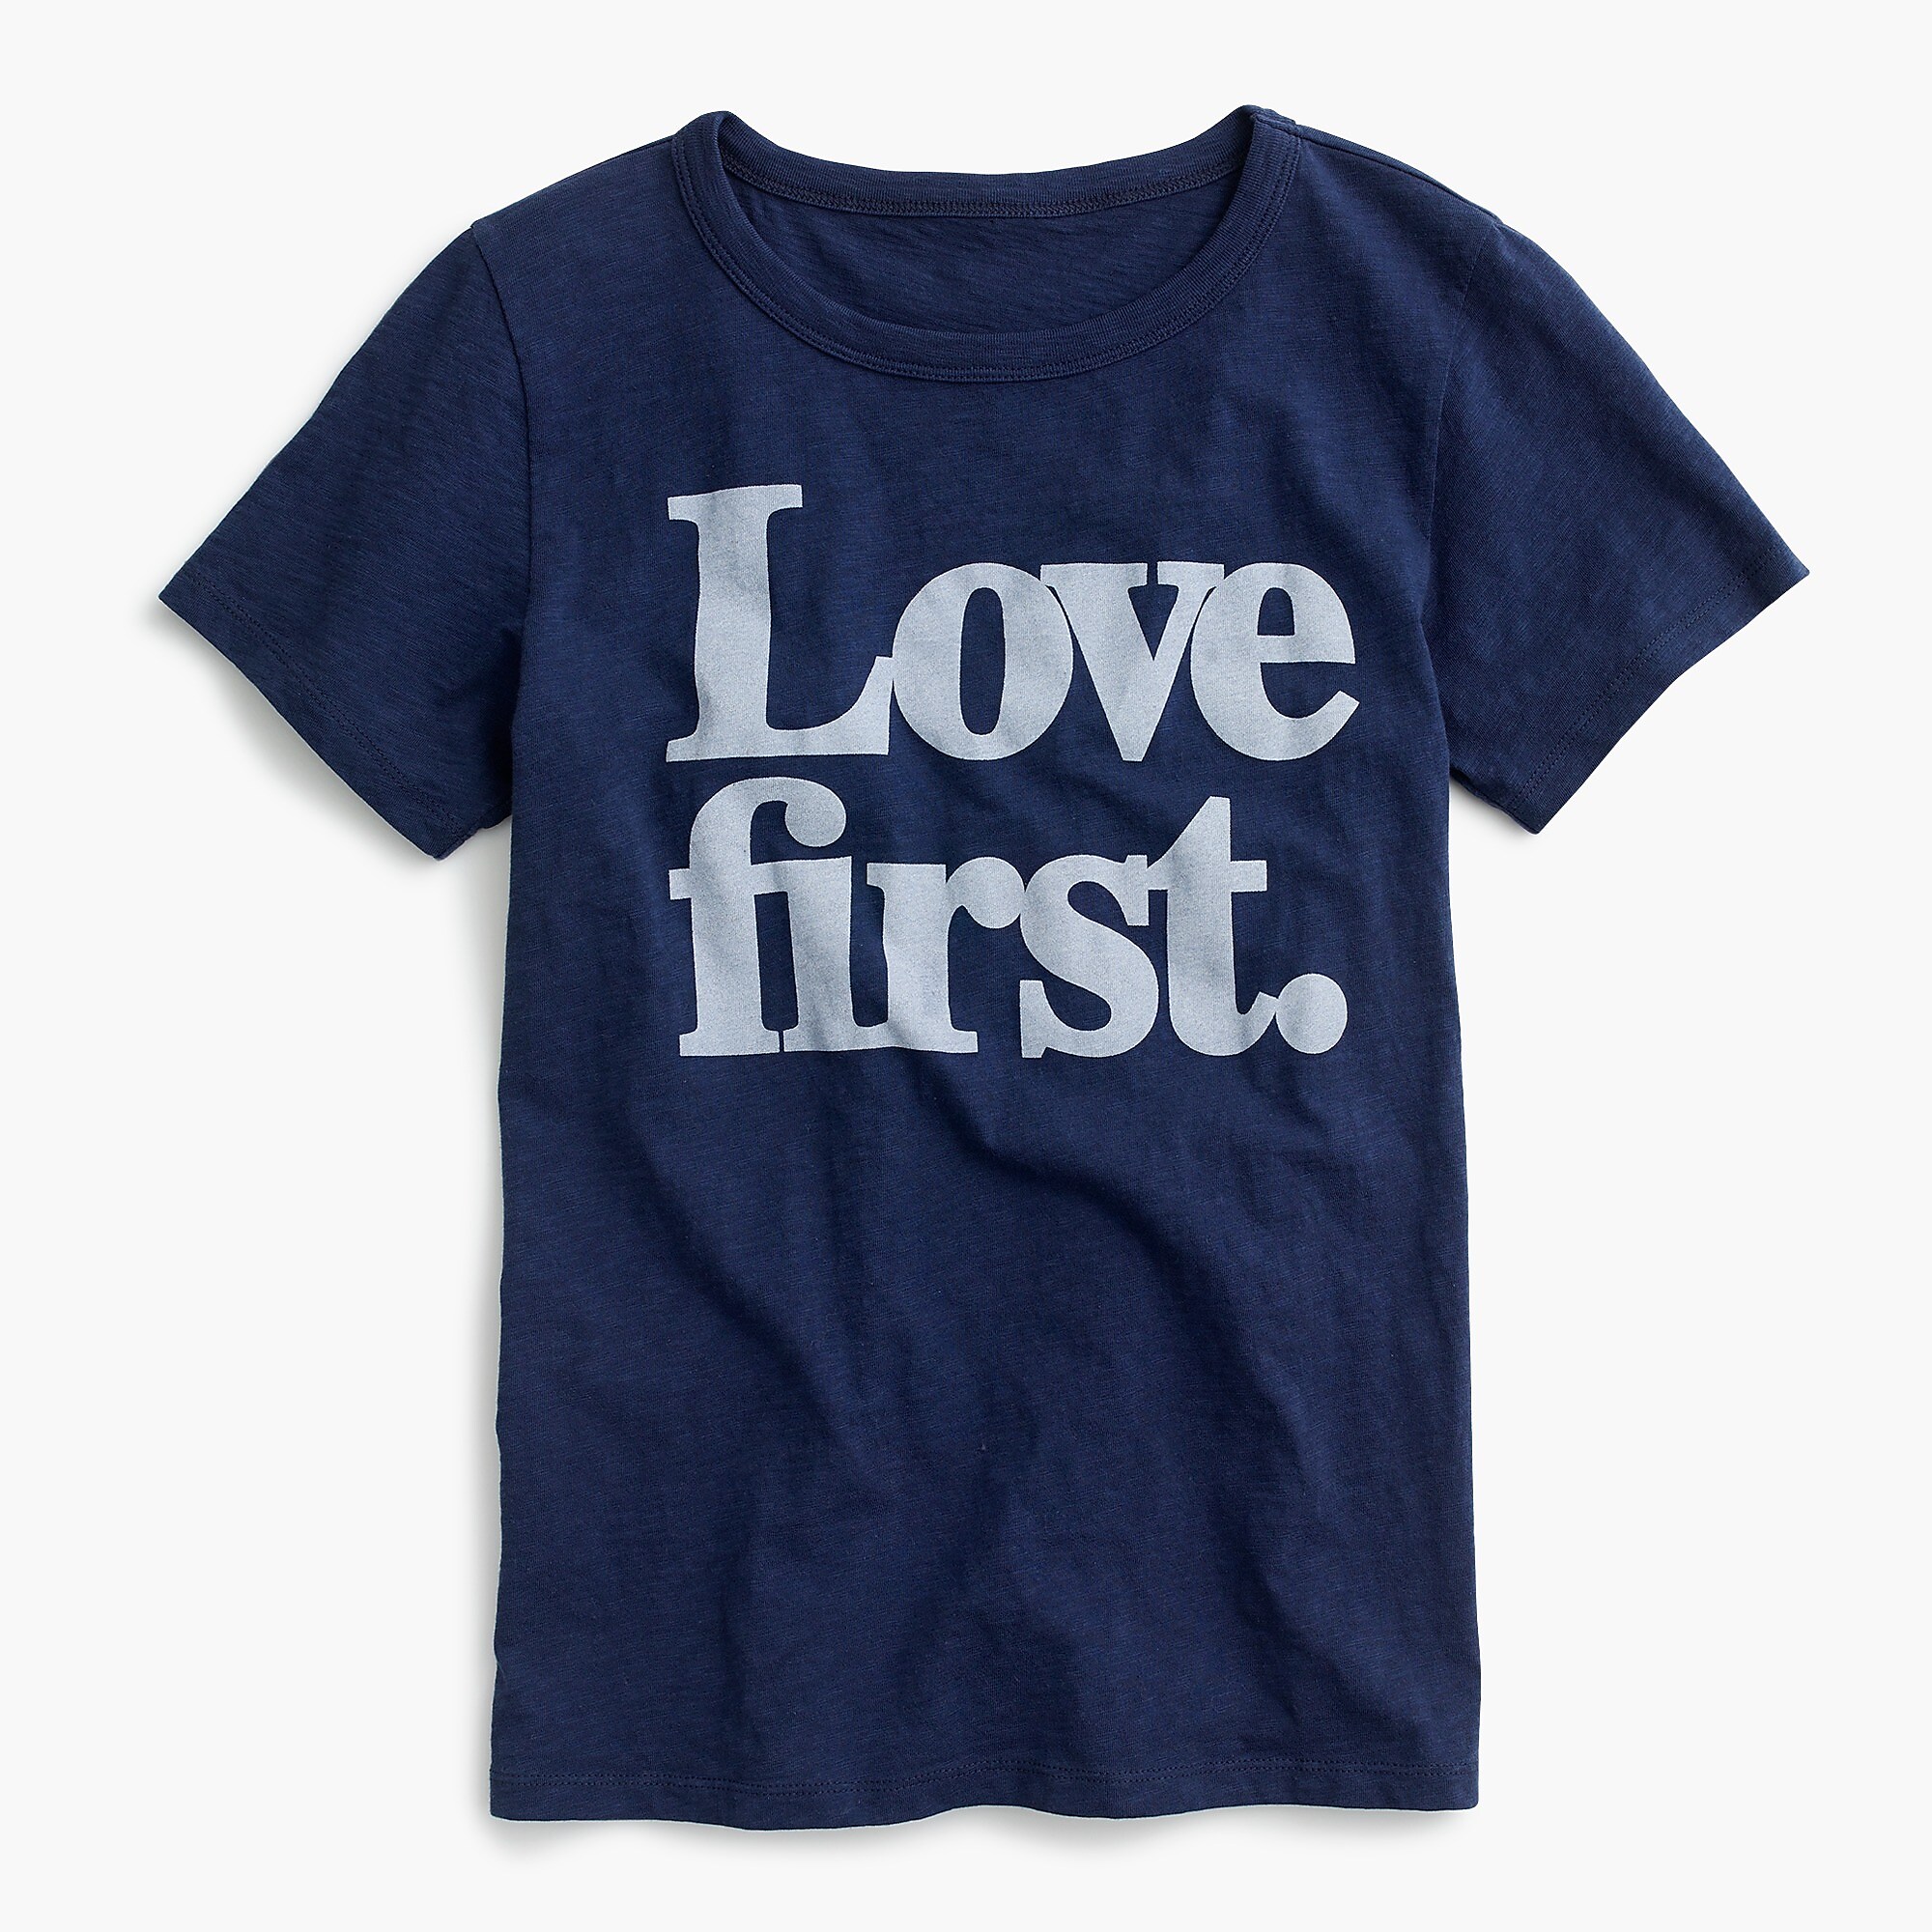 Dont first. Одежда Crew. And1 t-Shirts. Fwrd Nanushka Shirt. Words for t Shirt women.